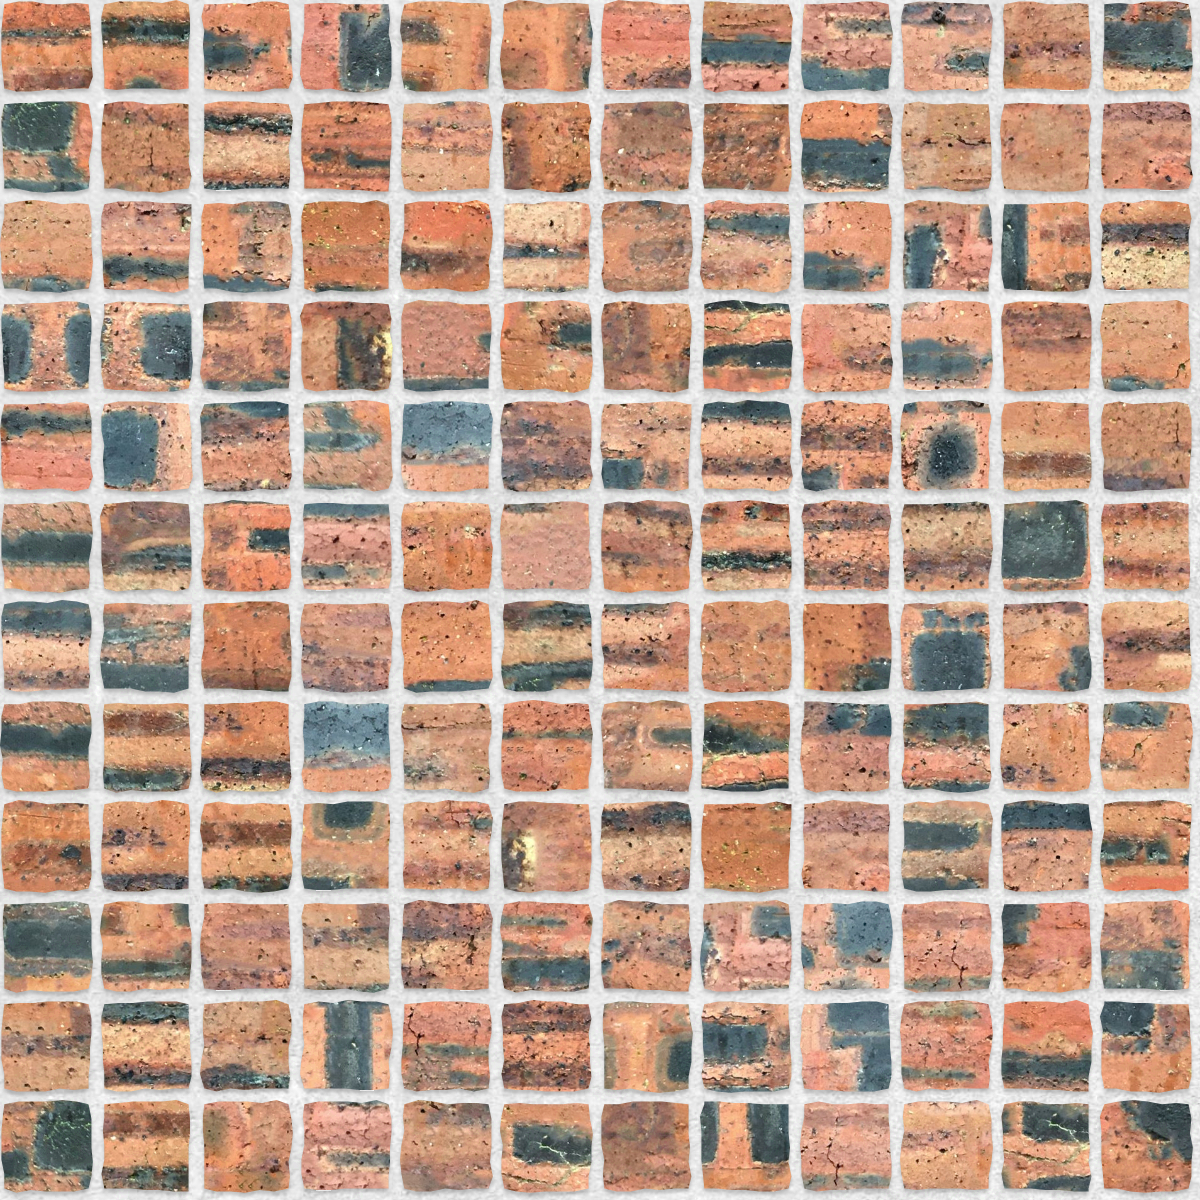 A seamless brick texture with factory brick units arranged in a Stack pattern